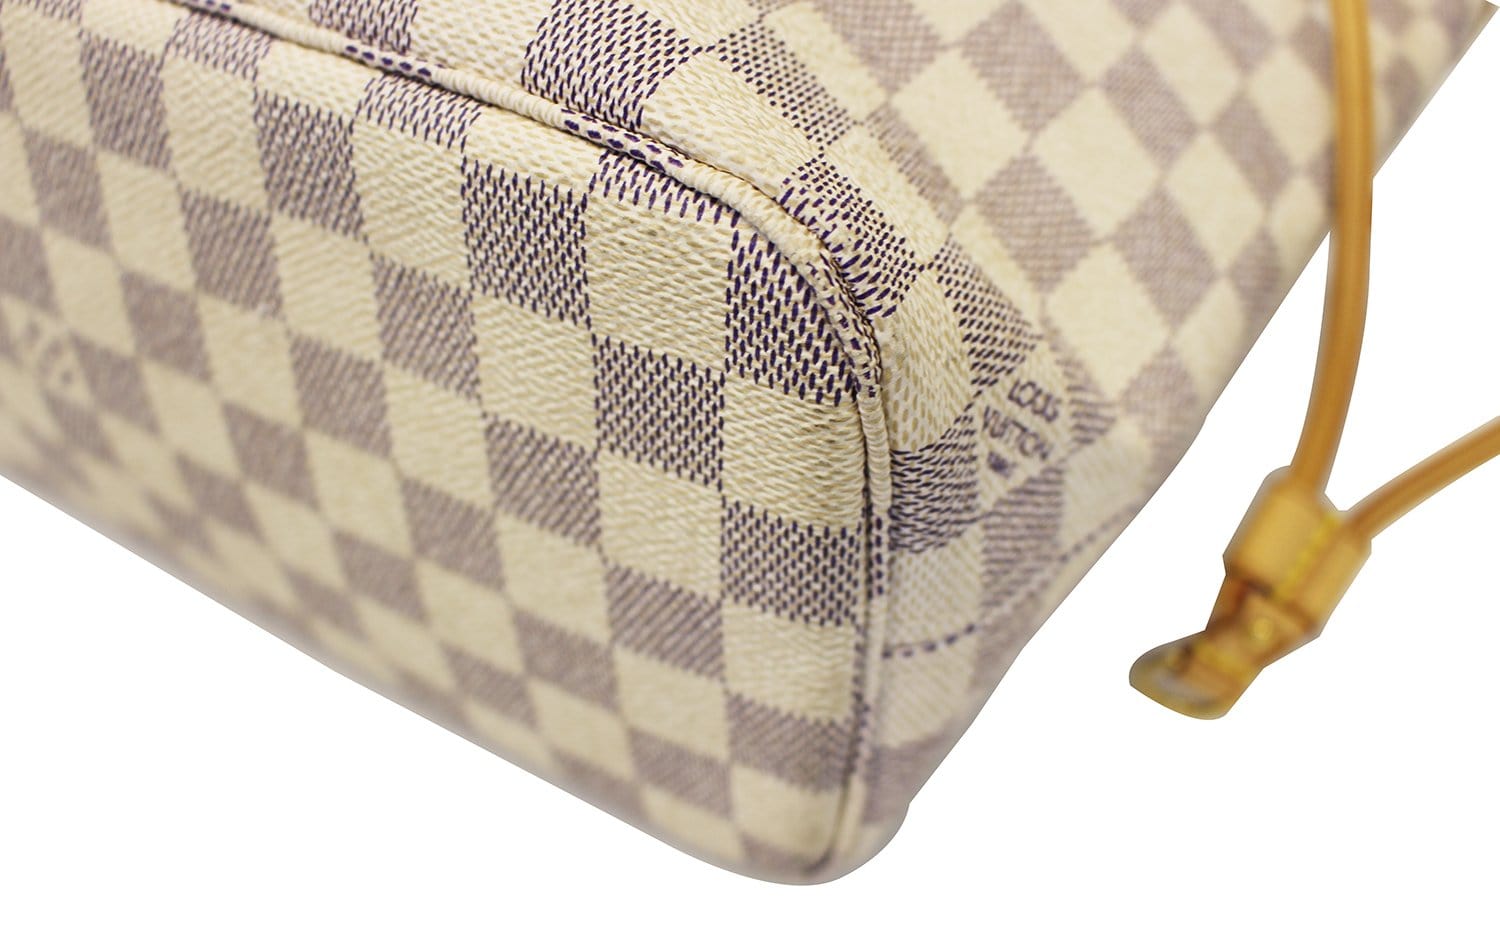 Louis Vuitton 2011 pre-owned Damier Ebene Neverfull PM Tote Bag